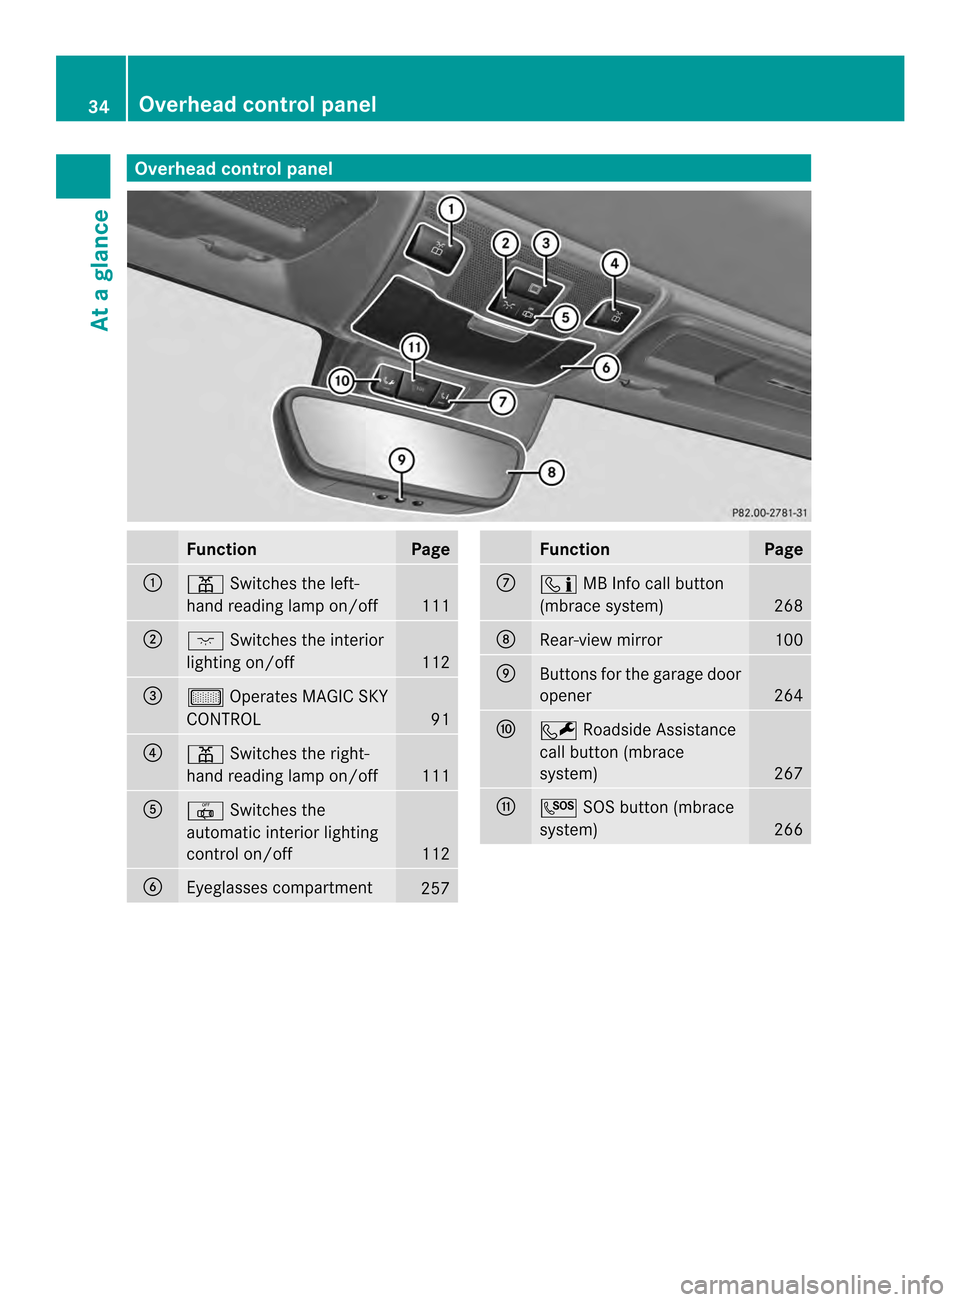 MERCEDES-BENZ SLK-Class 2013 R172 Owners Manual Overhea
dcontrol panel Function Page
0003
0012
Switches the left-
hand reading lamp on/off 111
0004
0003
Switches the interior
lighting on/off 112
0024
000C
Operates MAGIC SKY
CONTROL 91
0023
0012
Swi